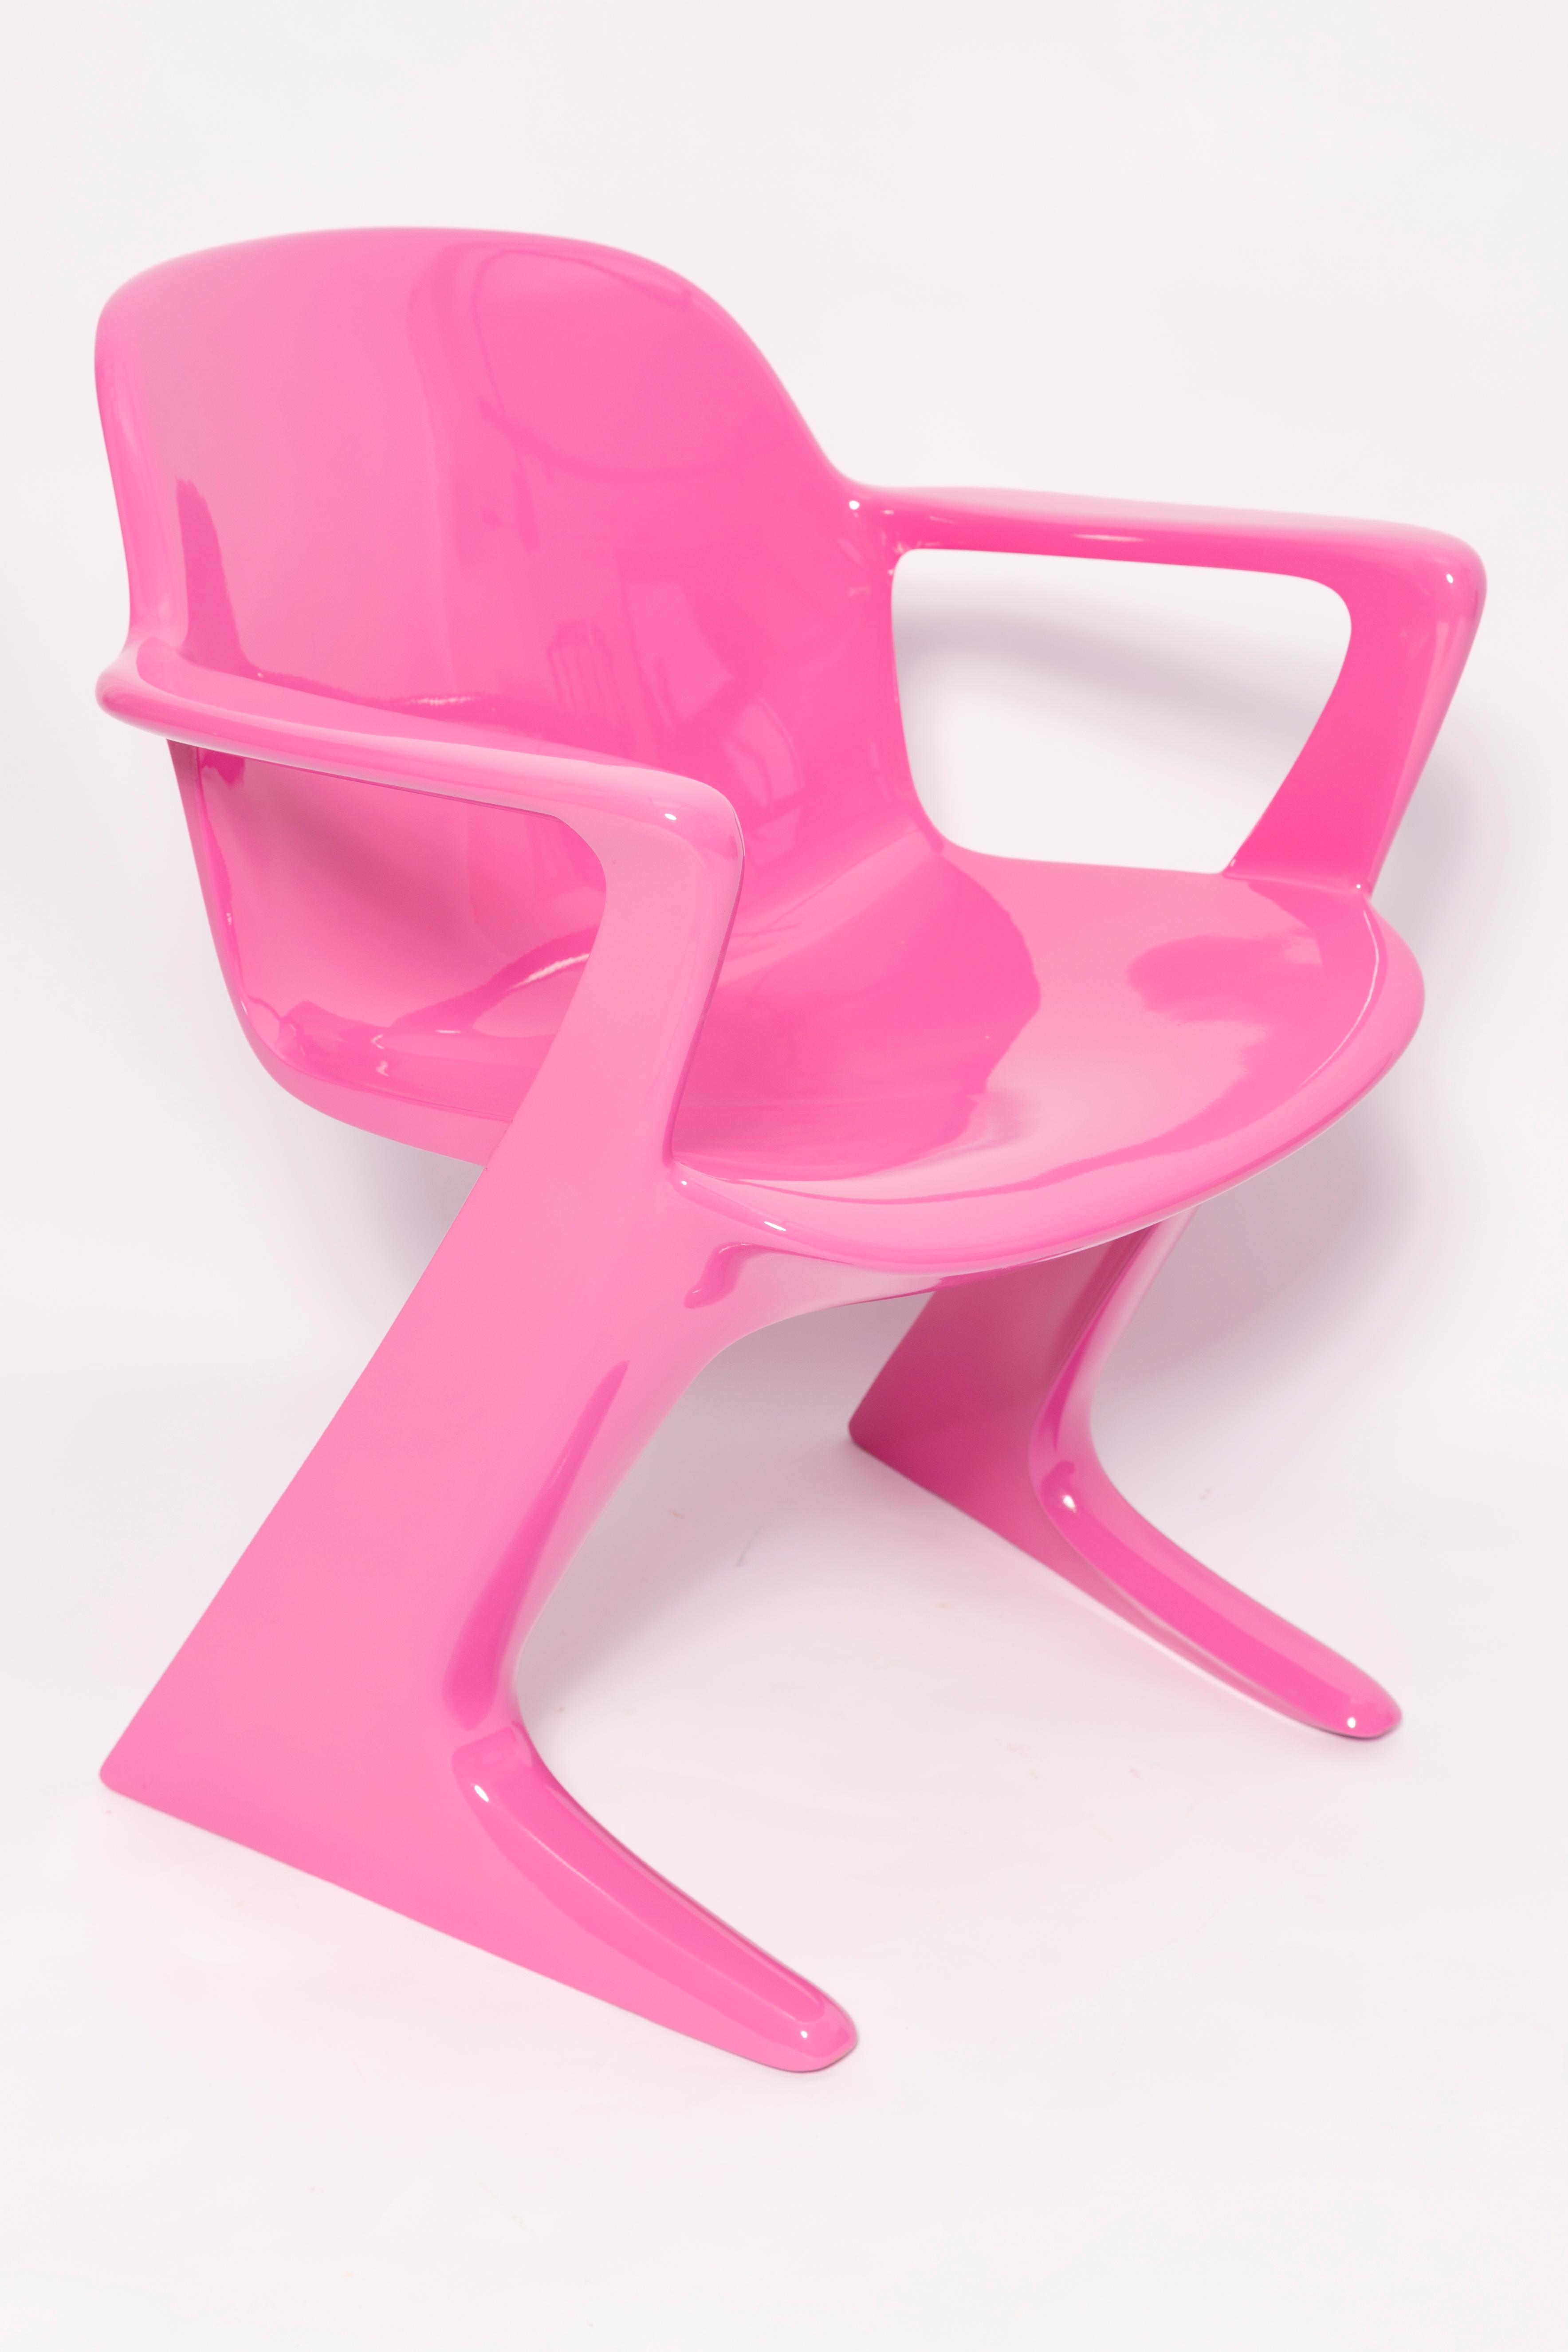 Lacquered Mid Century Pink Kangaroo Chair Designed by Ernst Moeckl, Germany, 1968 For Sale